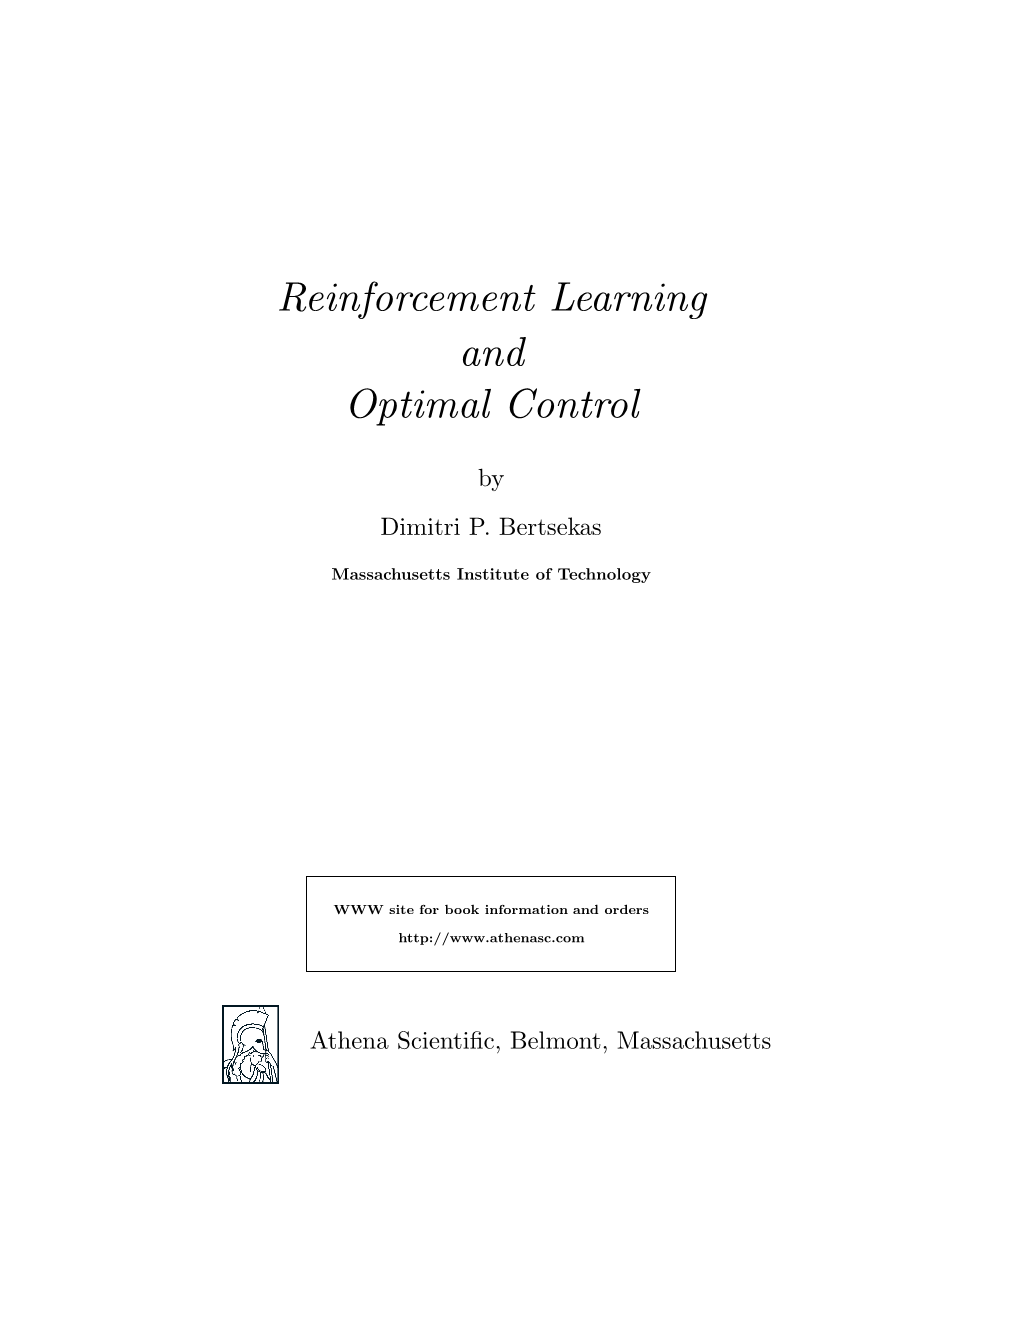 Reinforcement Learning and Optimal Control